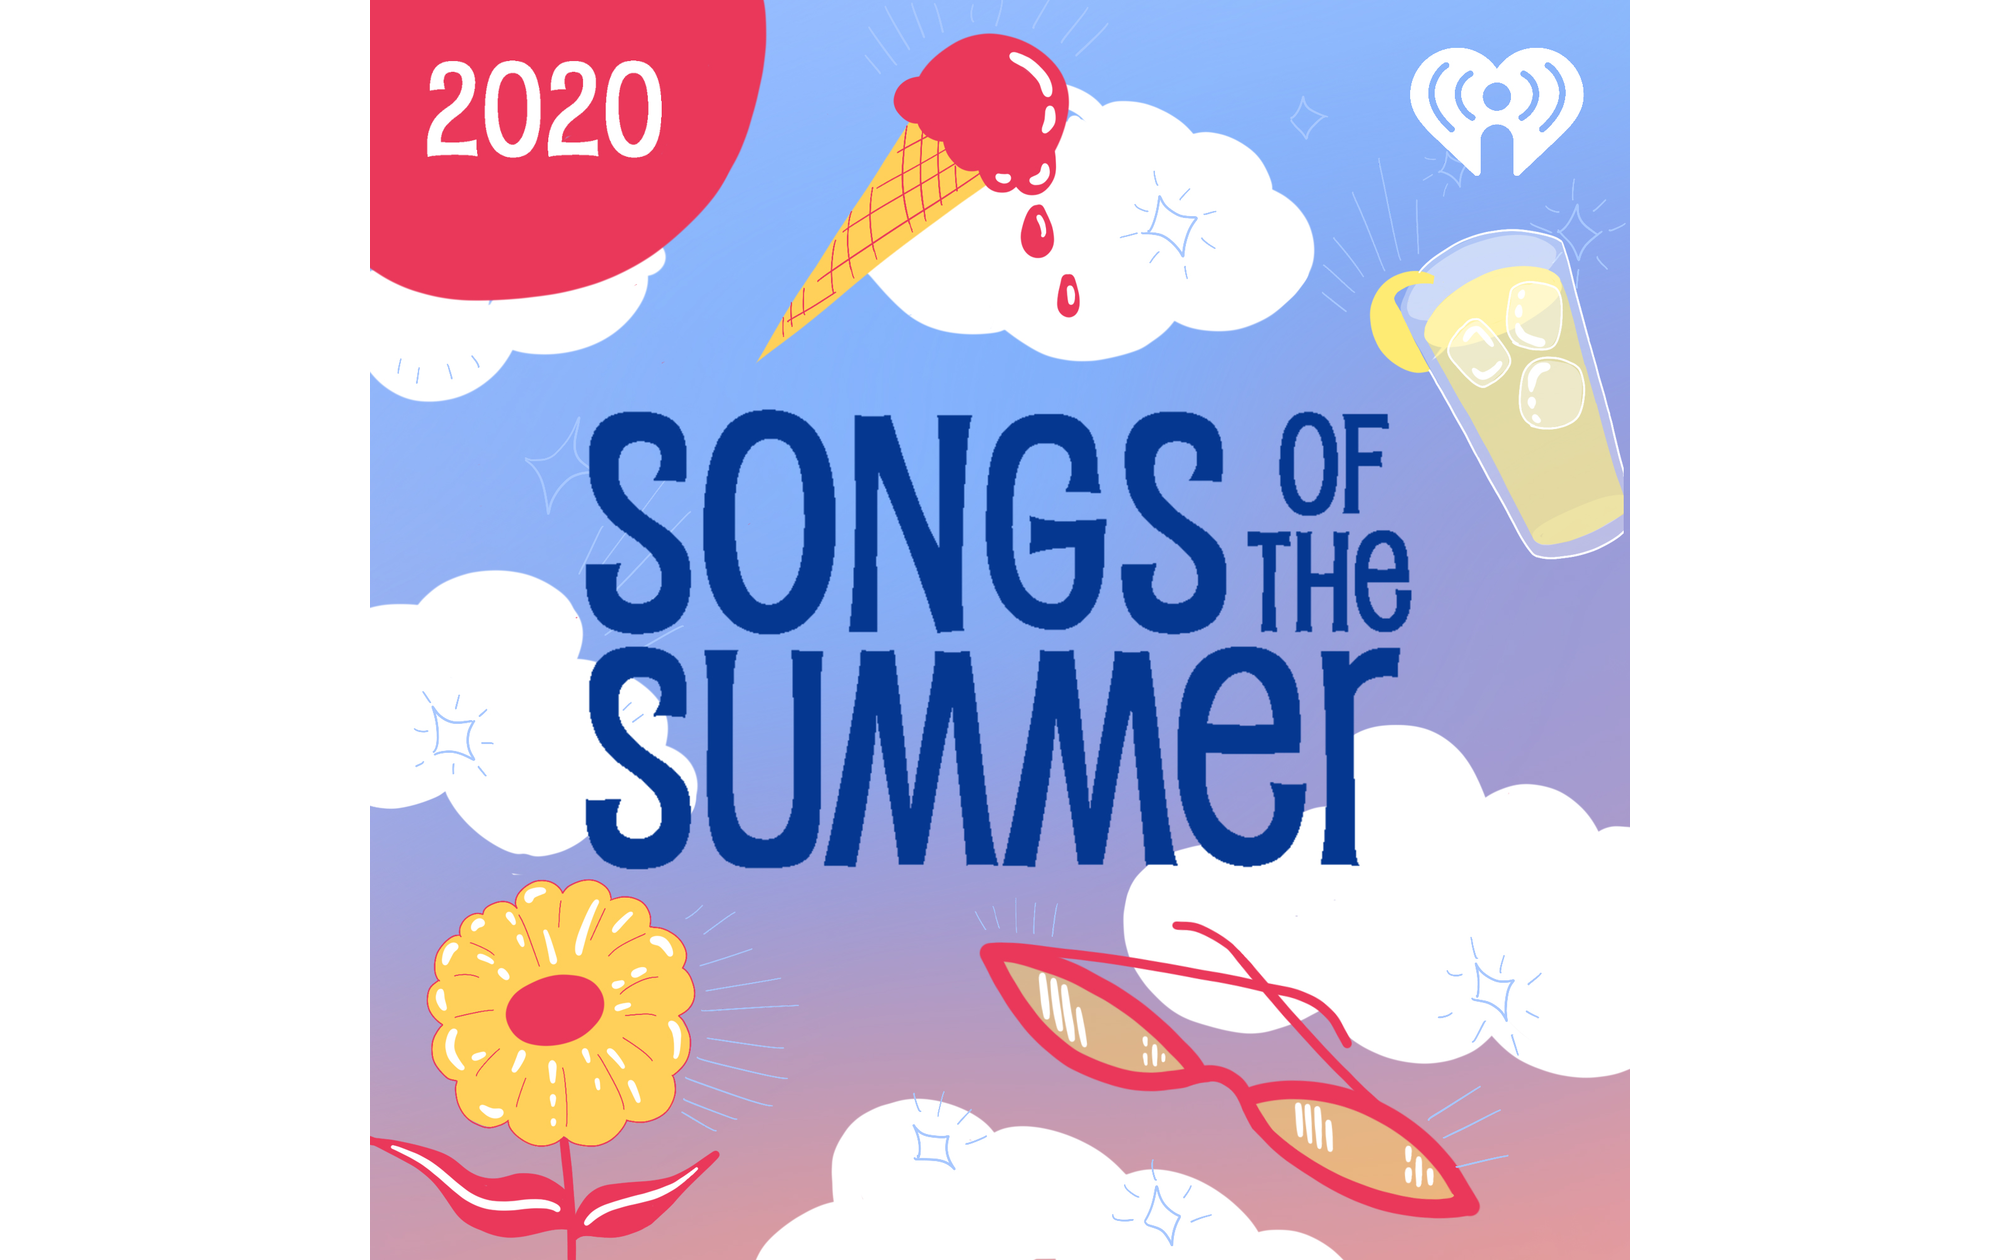 Best songs of the summer for 2020 along with some of the biggest